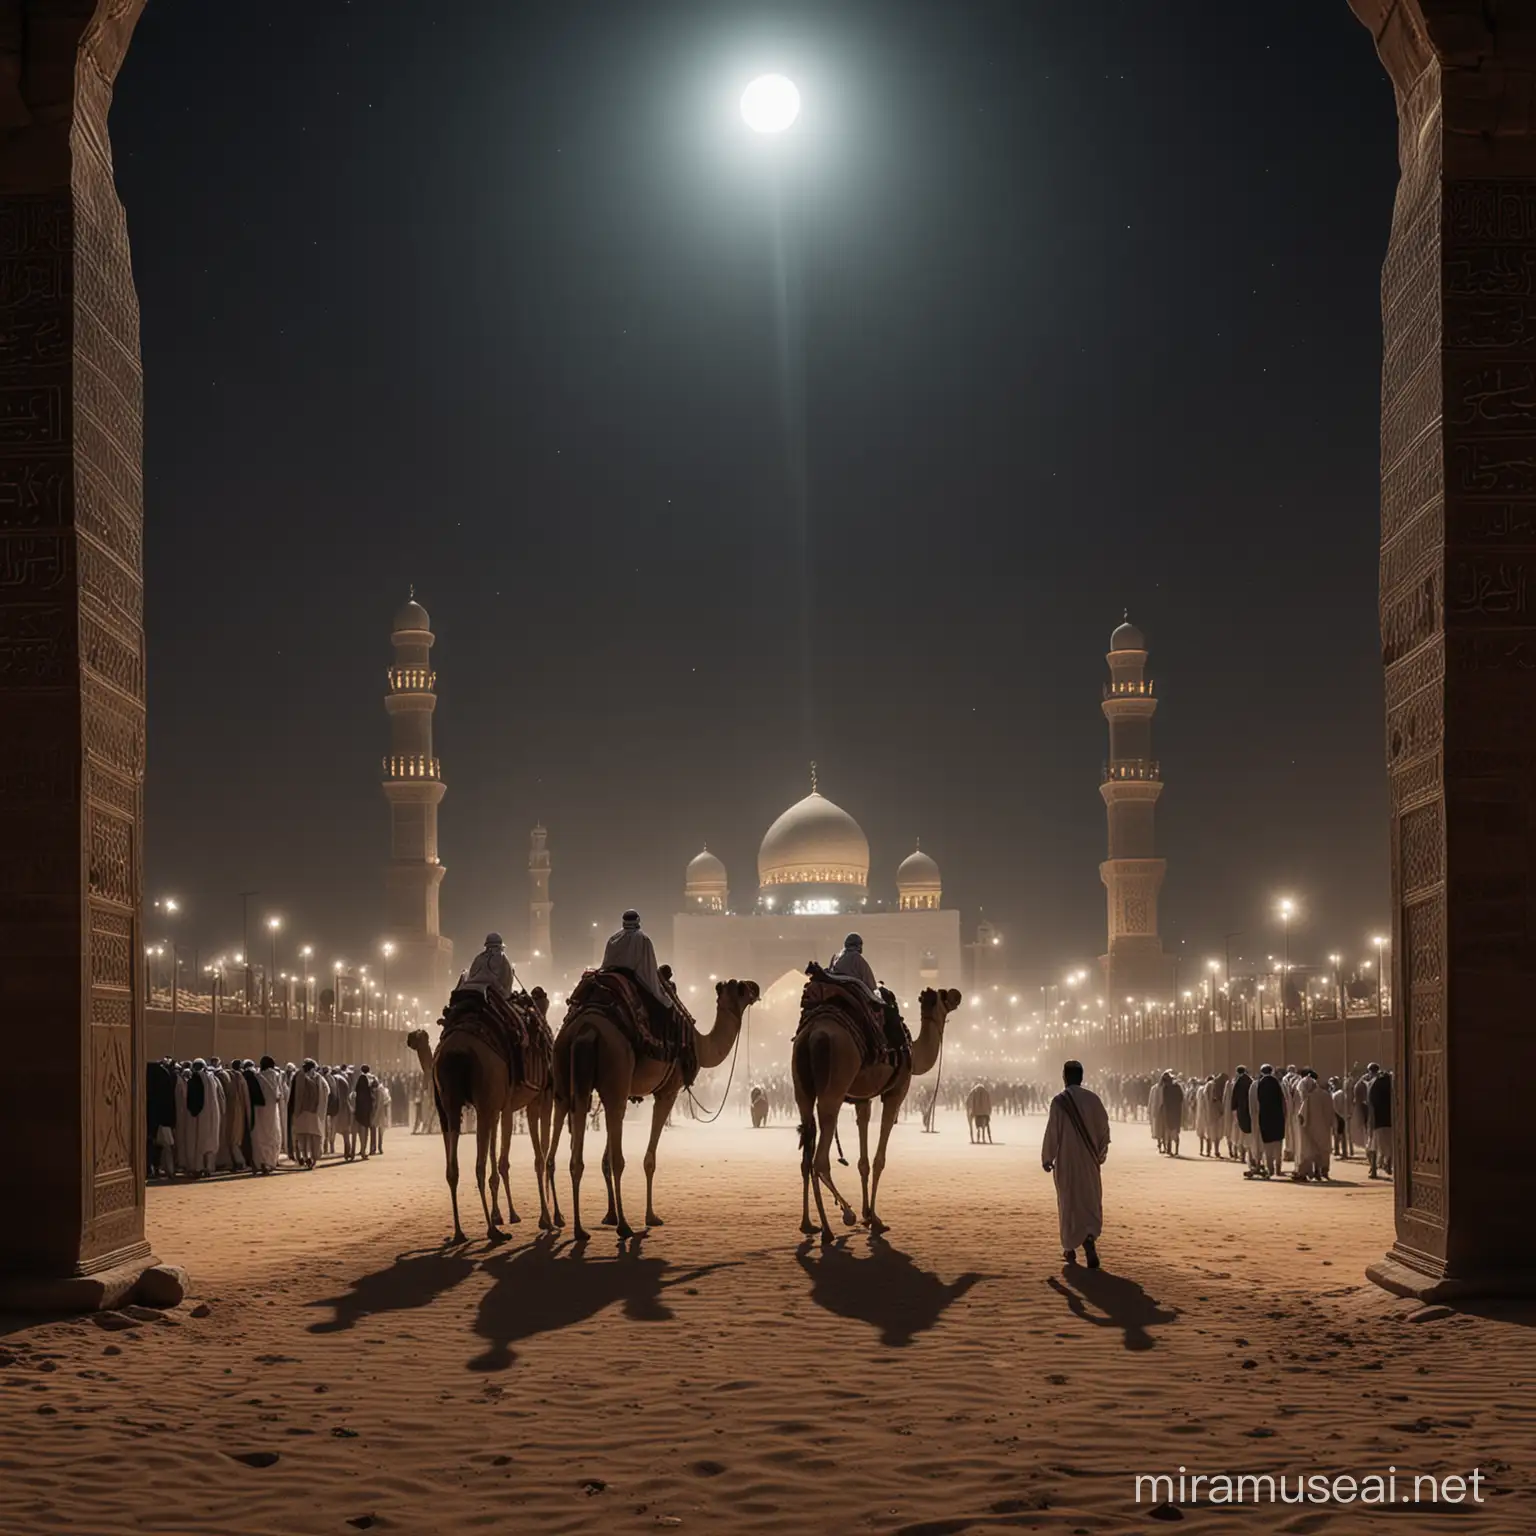 A dark image of an ancient arab society deeply connected to islam, an ancient muslim warrior playing with his children in distance, camels, The Kaaba in sight, night time moon light